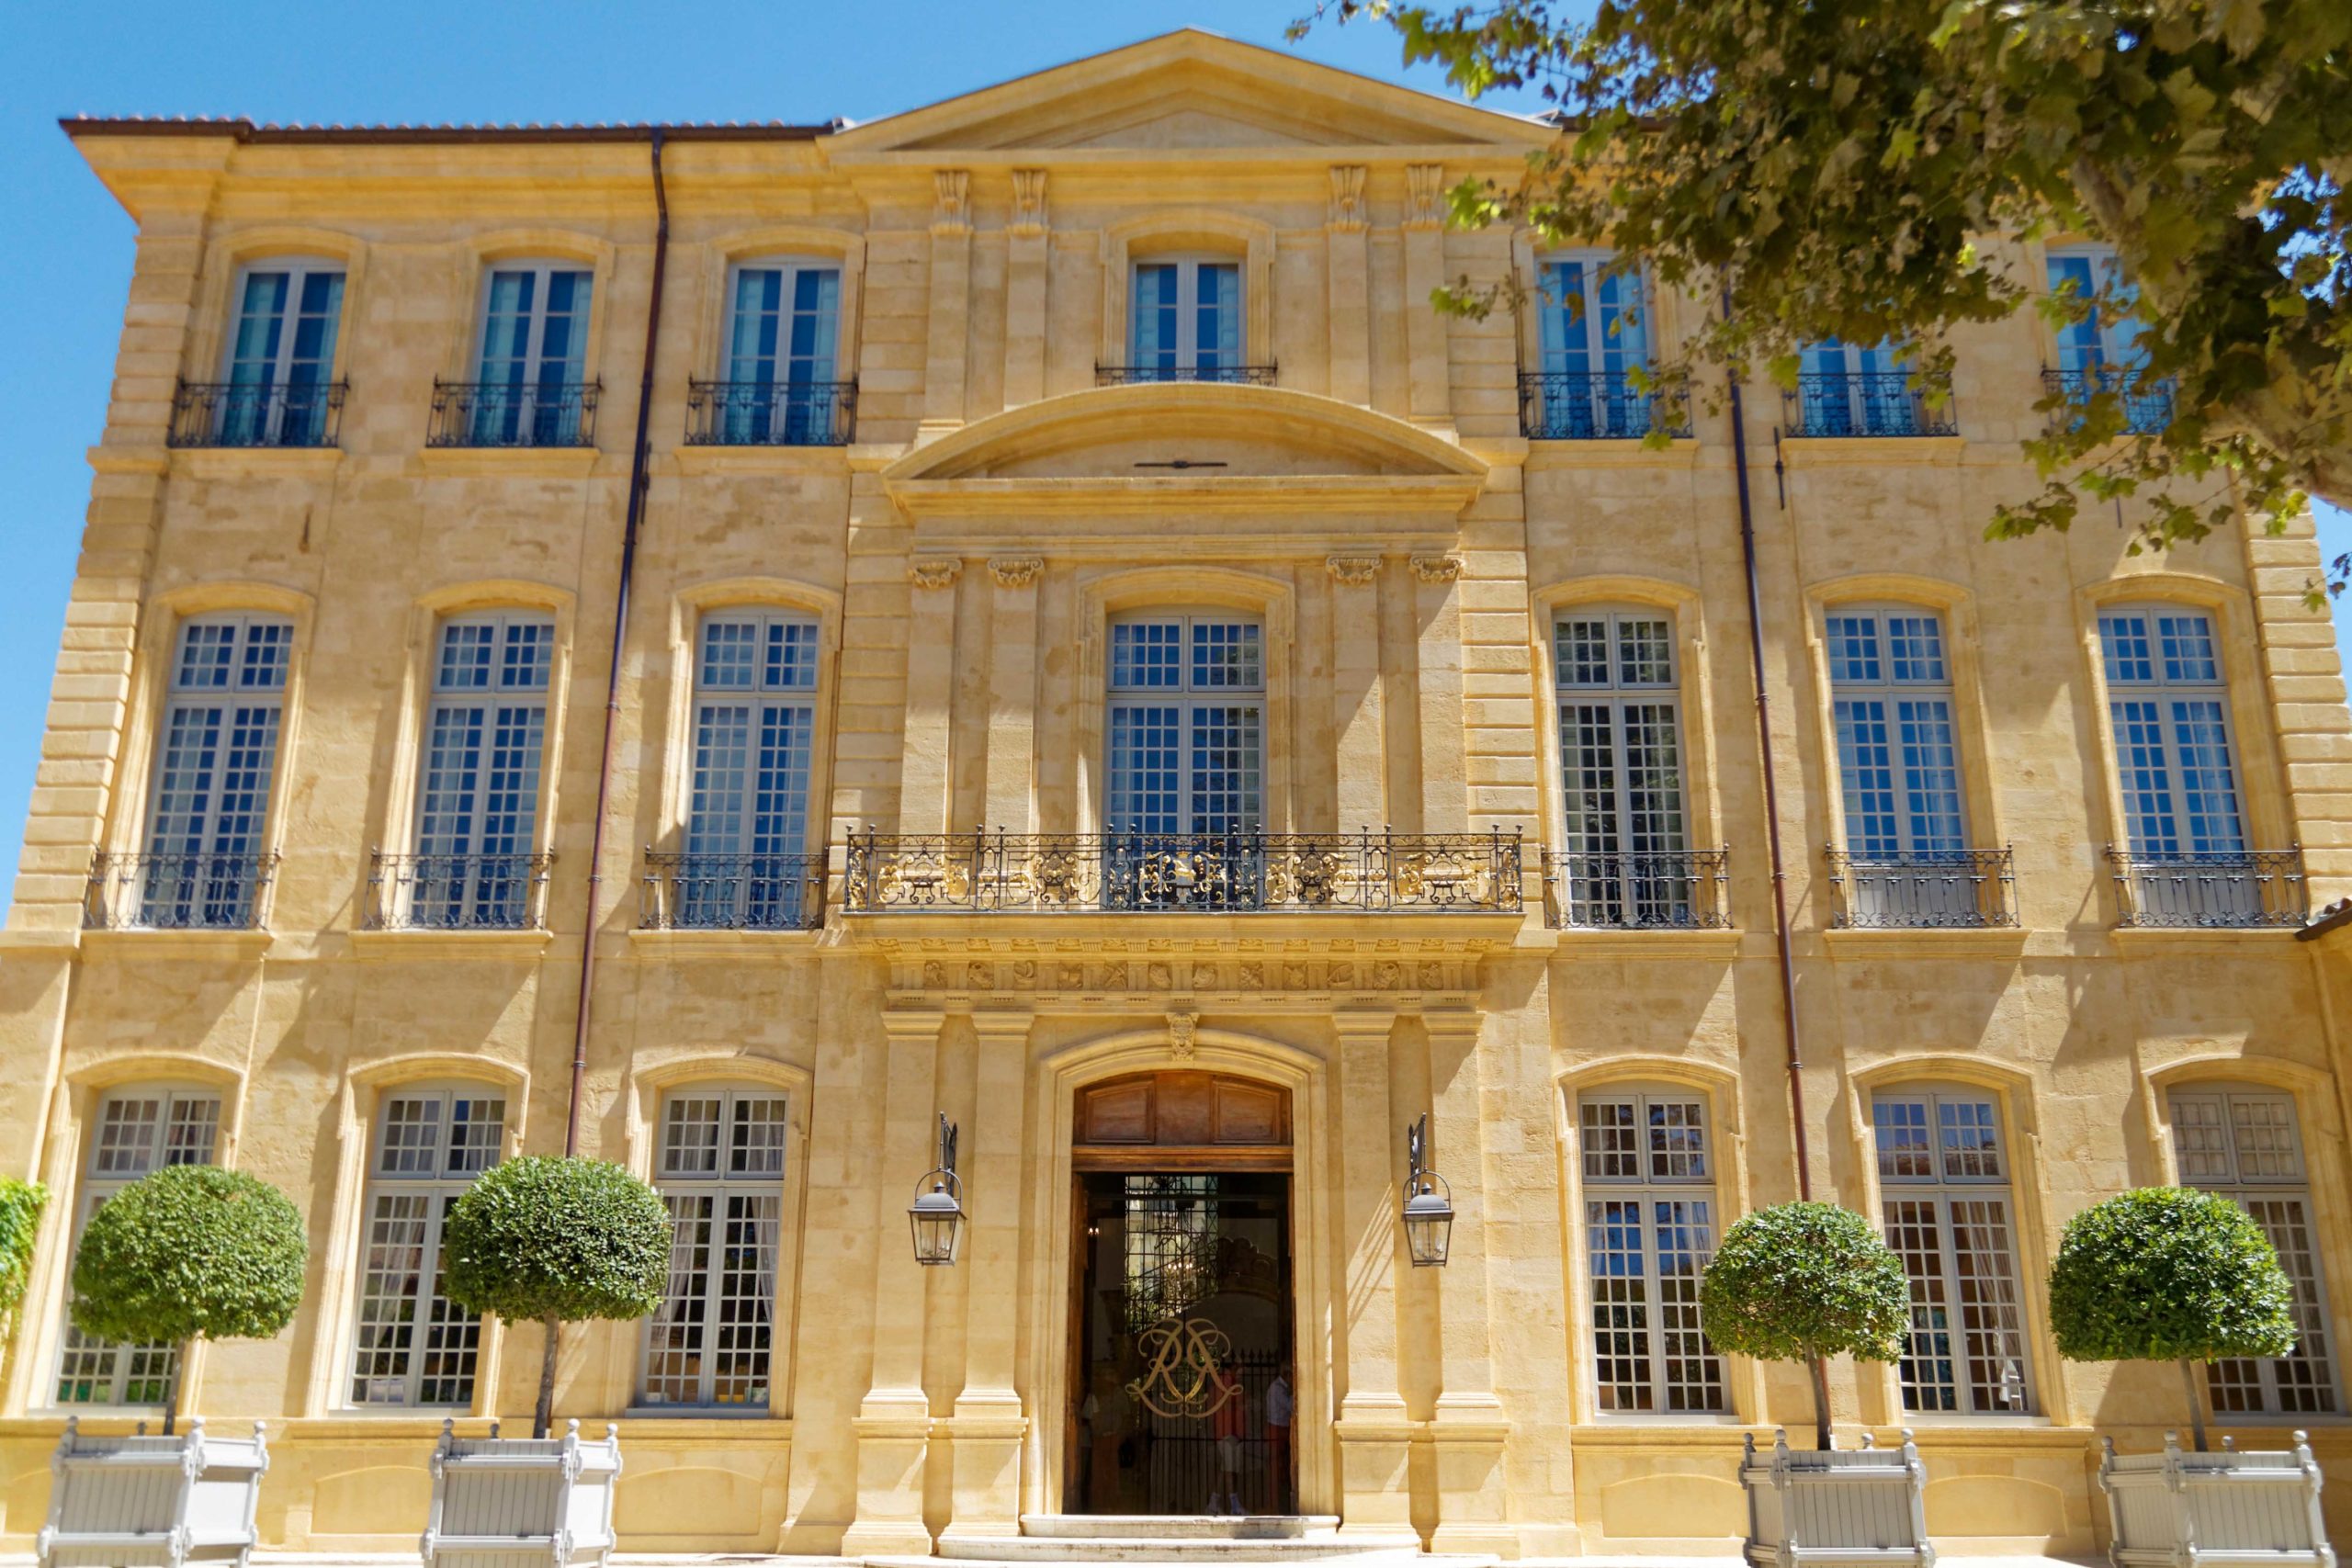 Aix-en-Provence old town - Hôtel de Caumont © Bjs - licence [CC BY-SA 4.0] from Wikimedia Commons